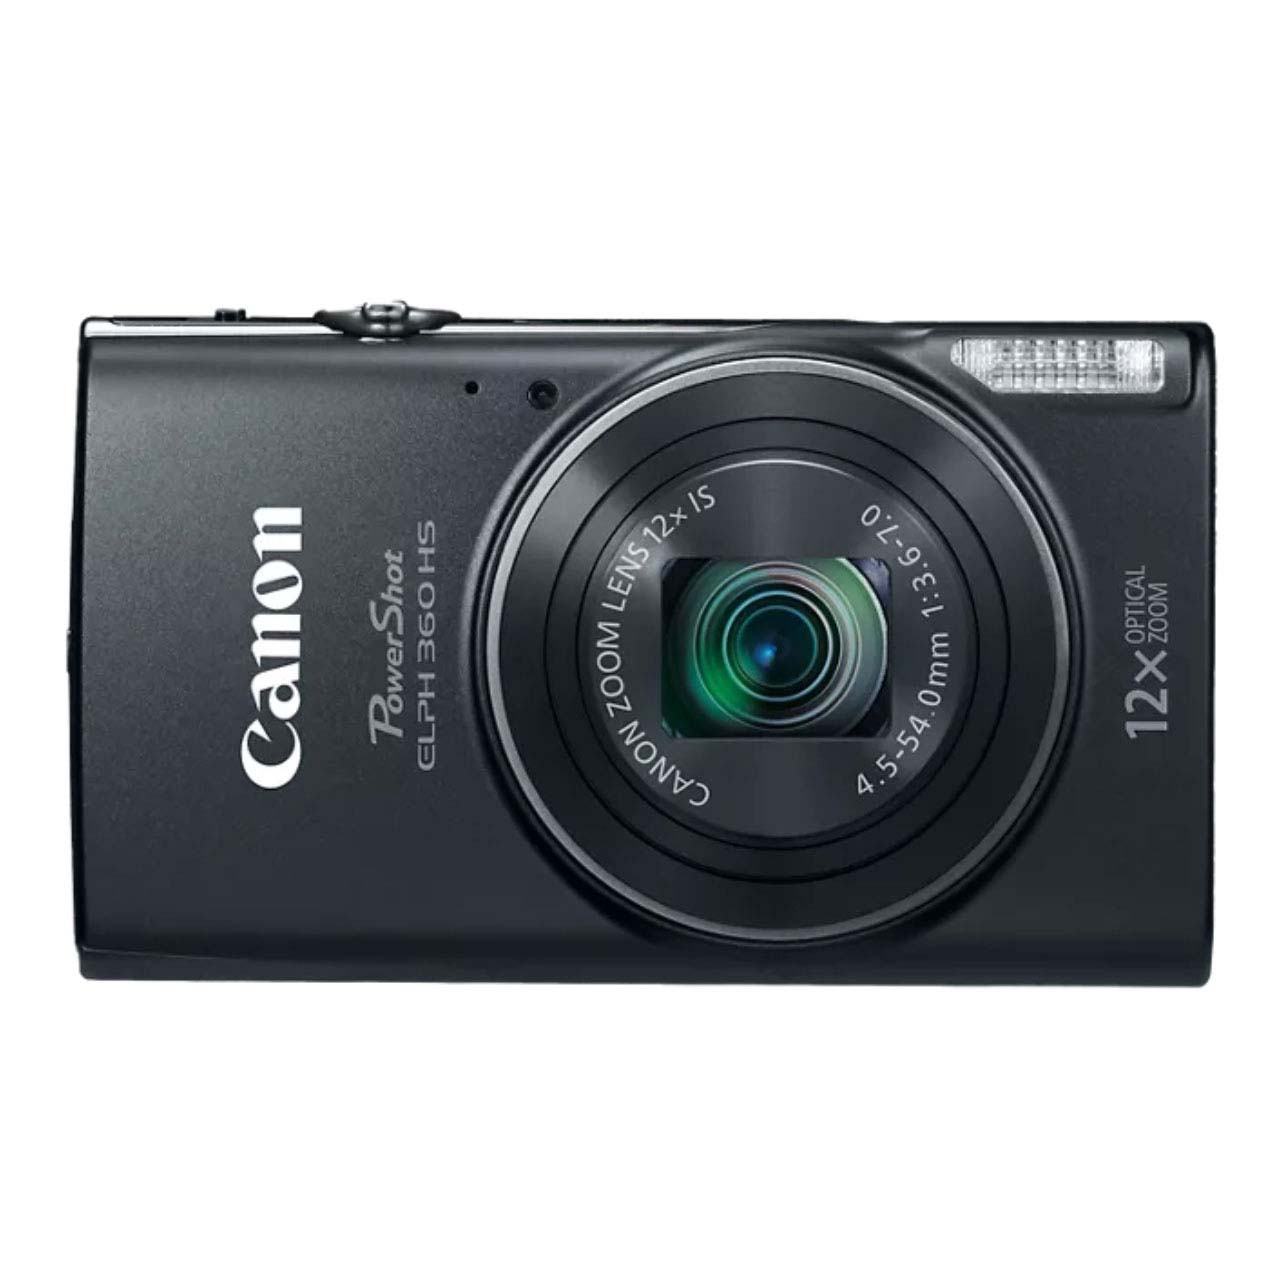 Front view of Canon compact camera in black